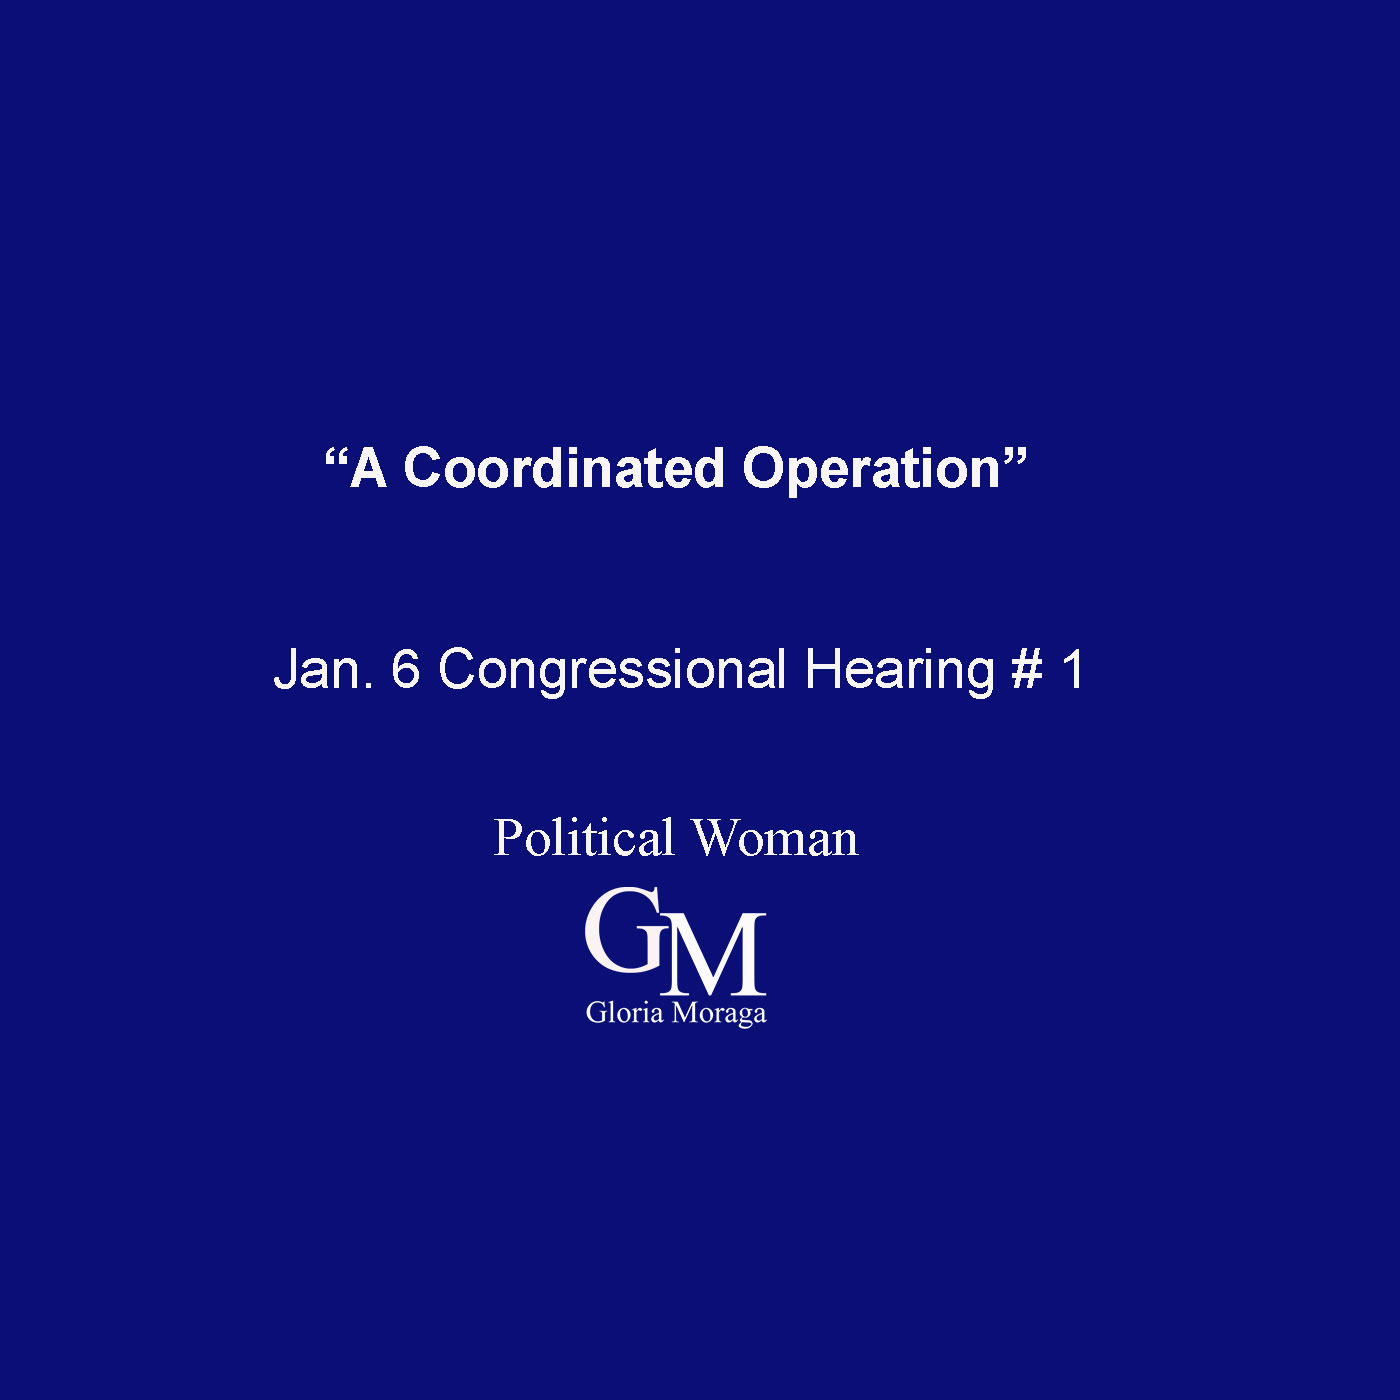 #1 "A Coordinated Operation" Hearing #1